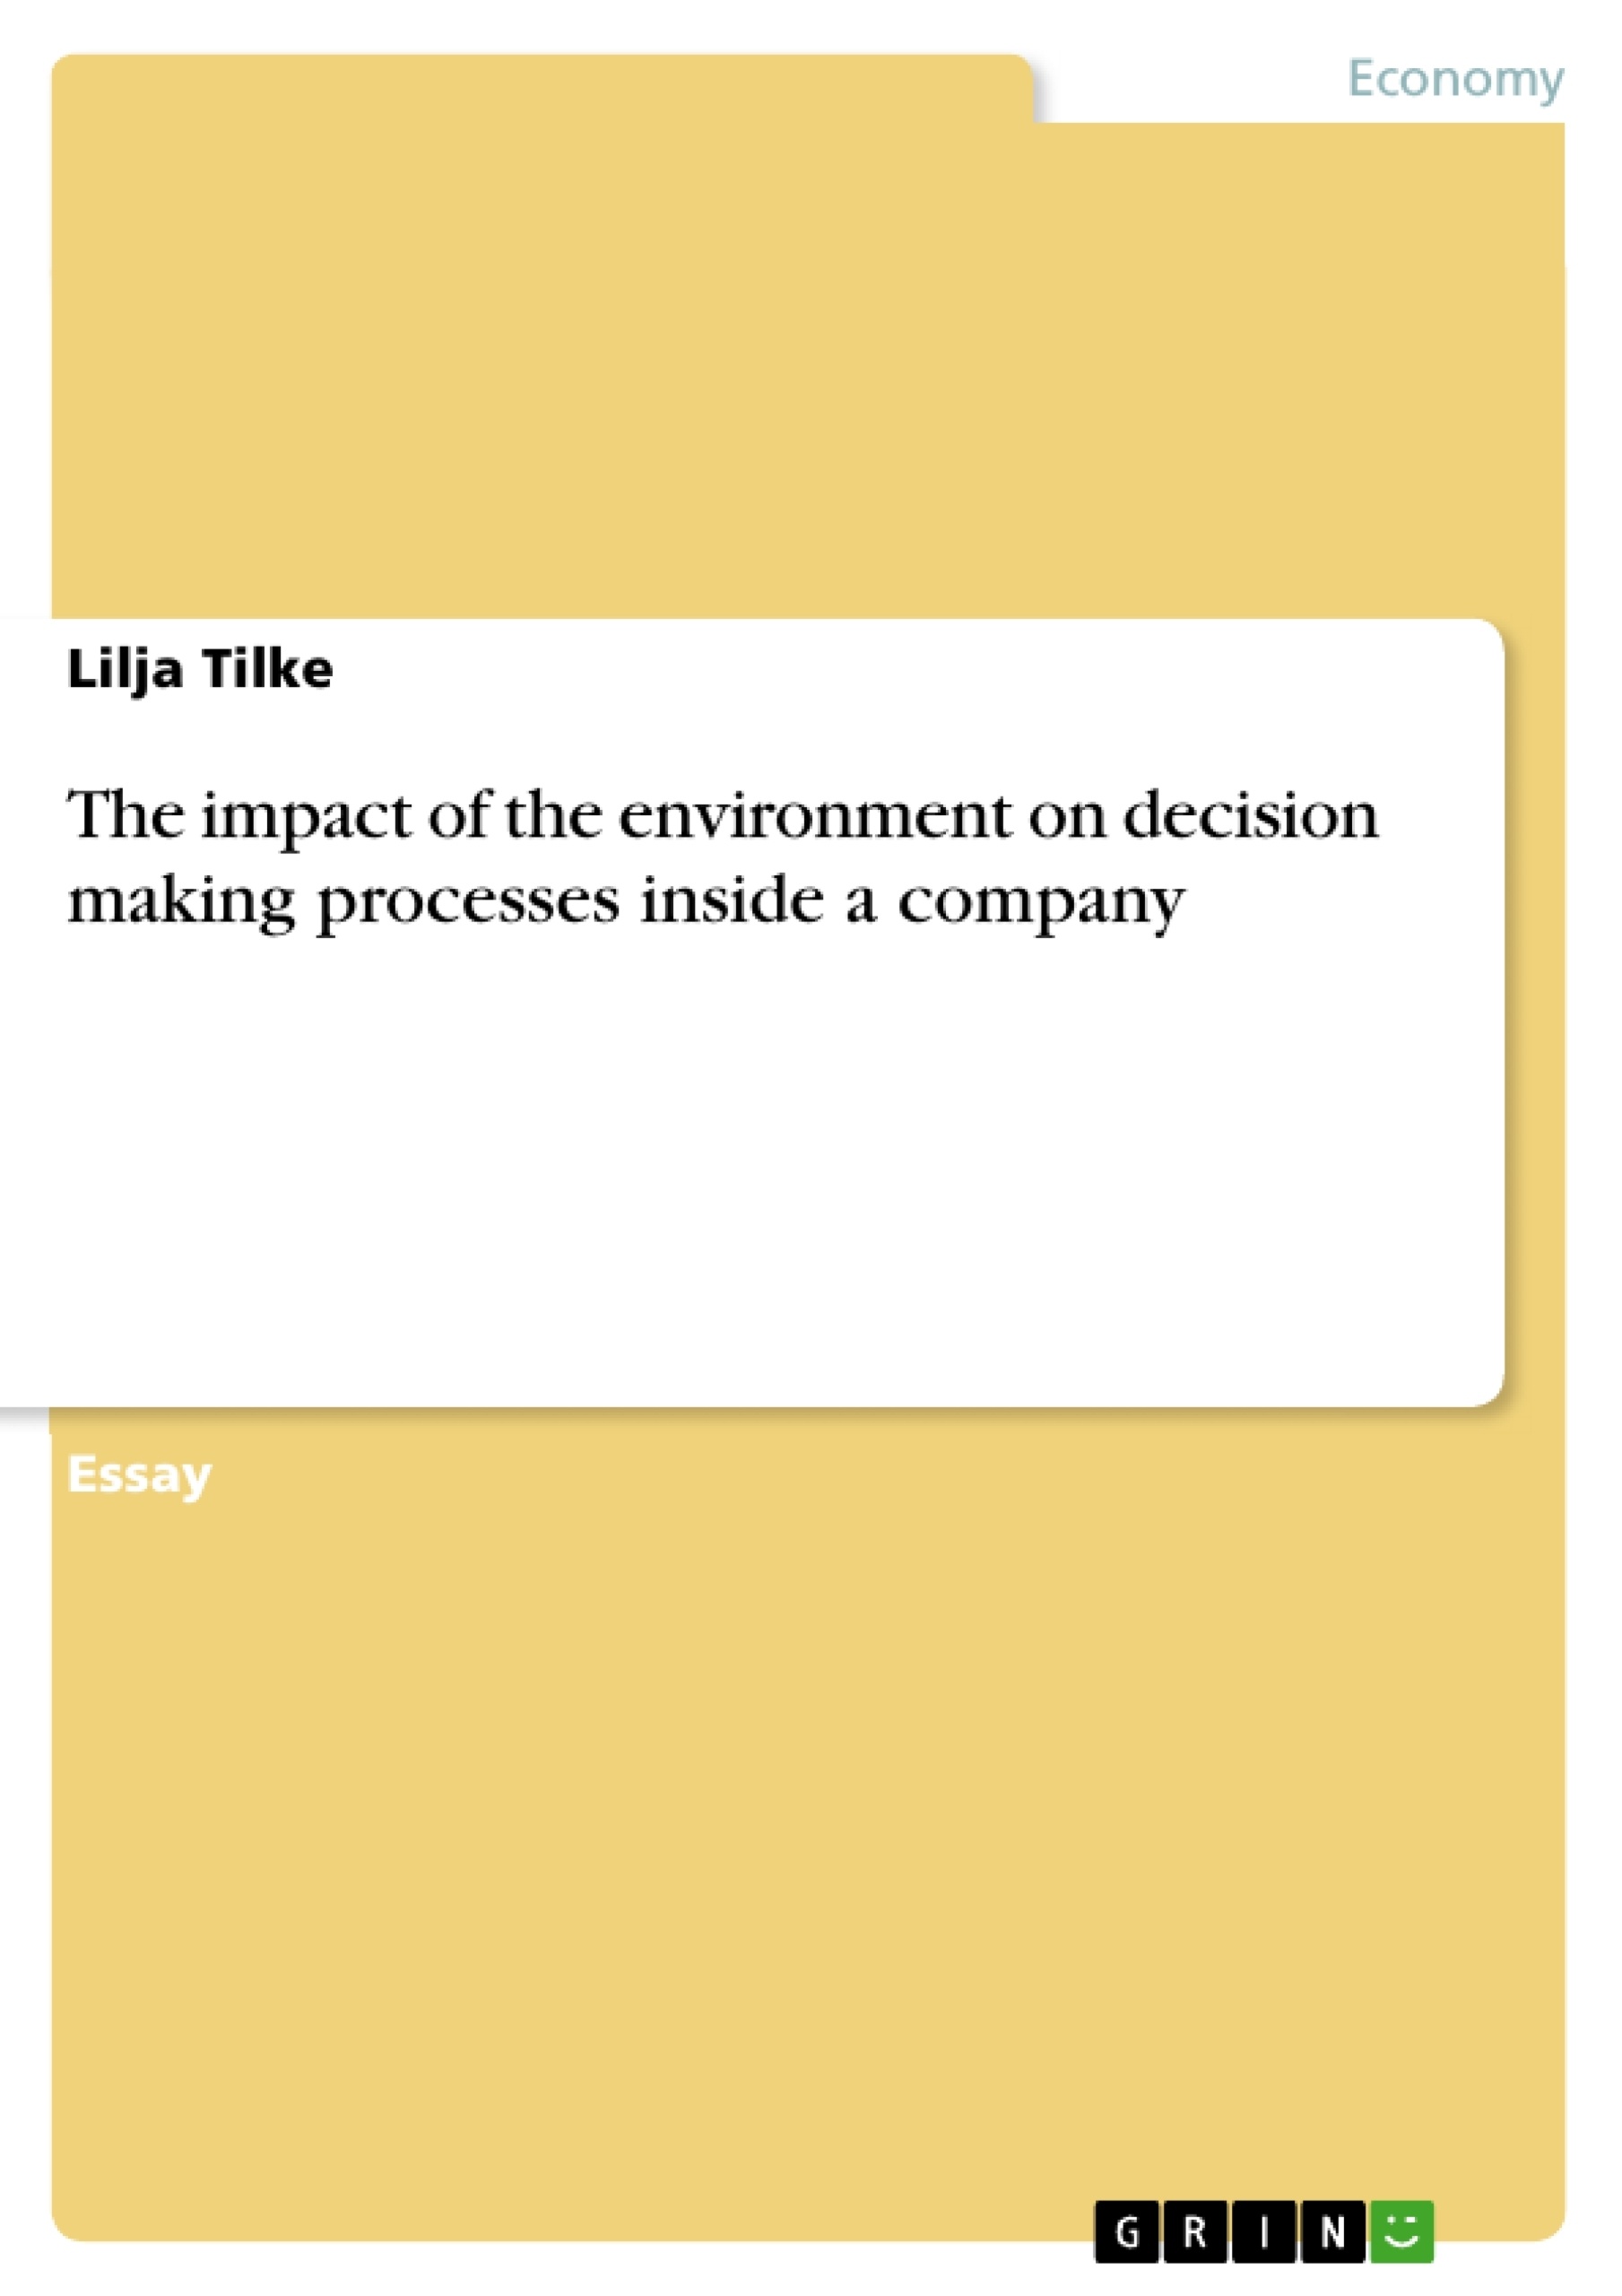 Titel: The impact of the environment on decision making processes inside a company